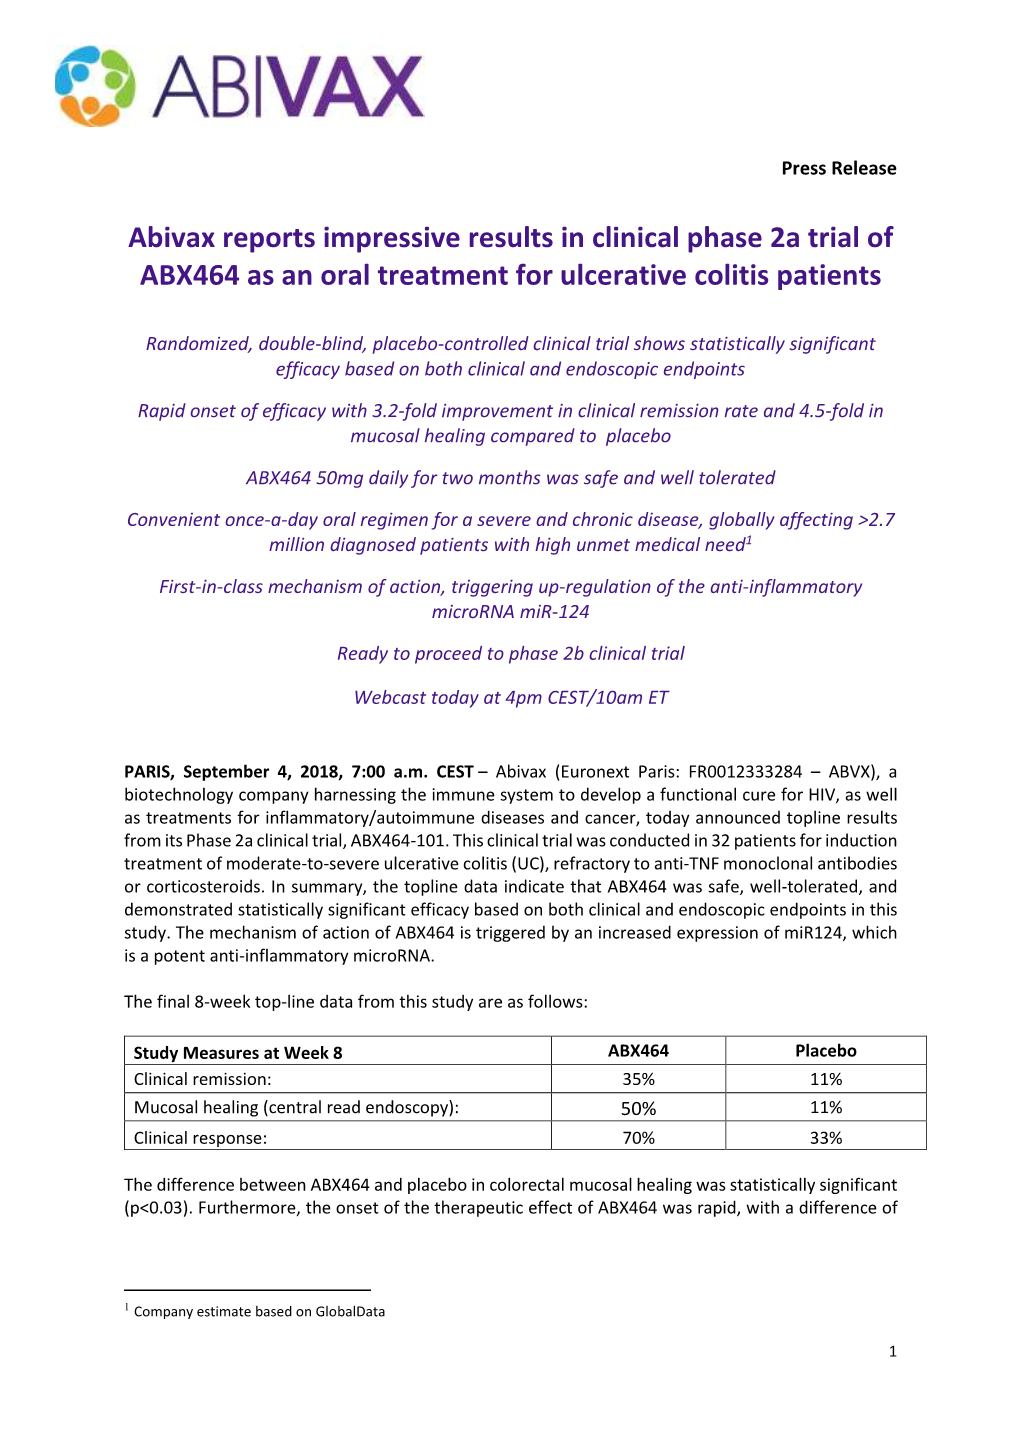 Abivax Reports Impressive Results in Clinical Phase 2A Trial of ABX464 As an Oral Treatment for Ulcerative Colitis Patients